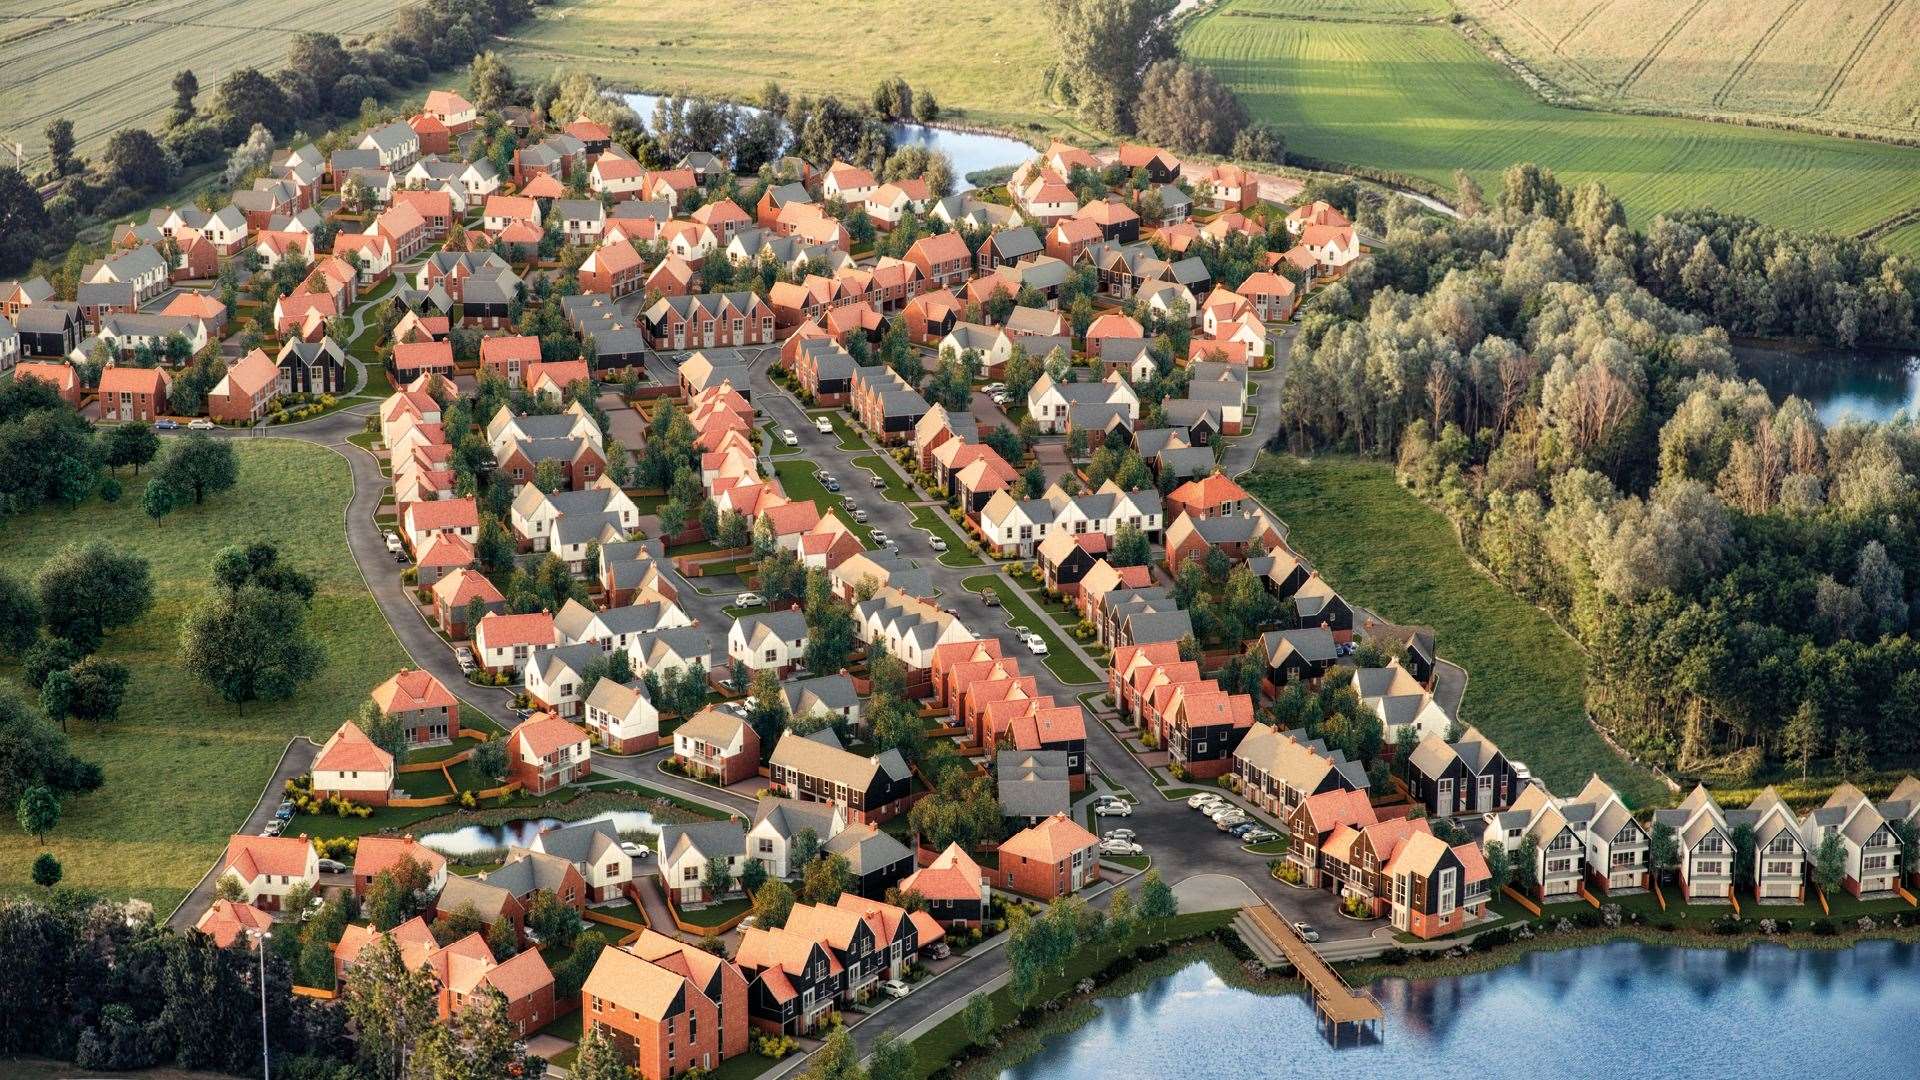 It was feared the Conningbrook Lakes development - seen here in a computer-generated image - would disturb Two Tone's grave